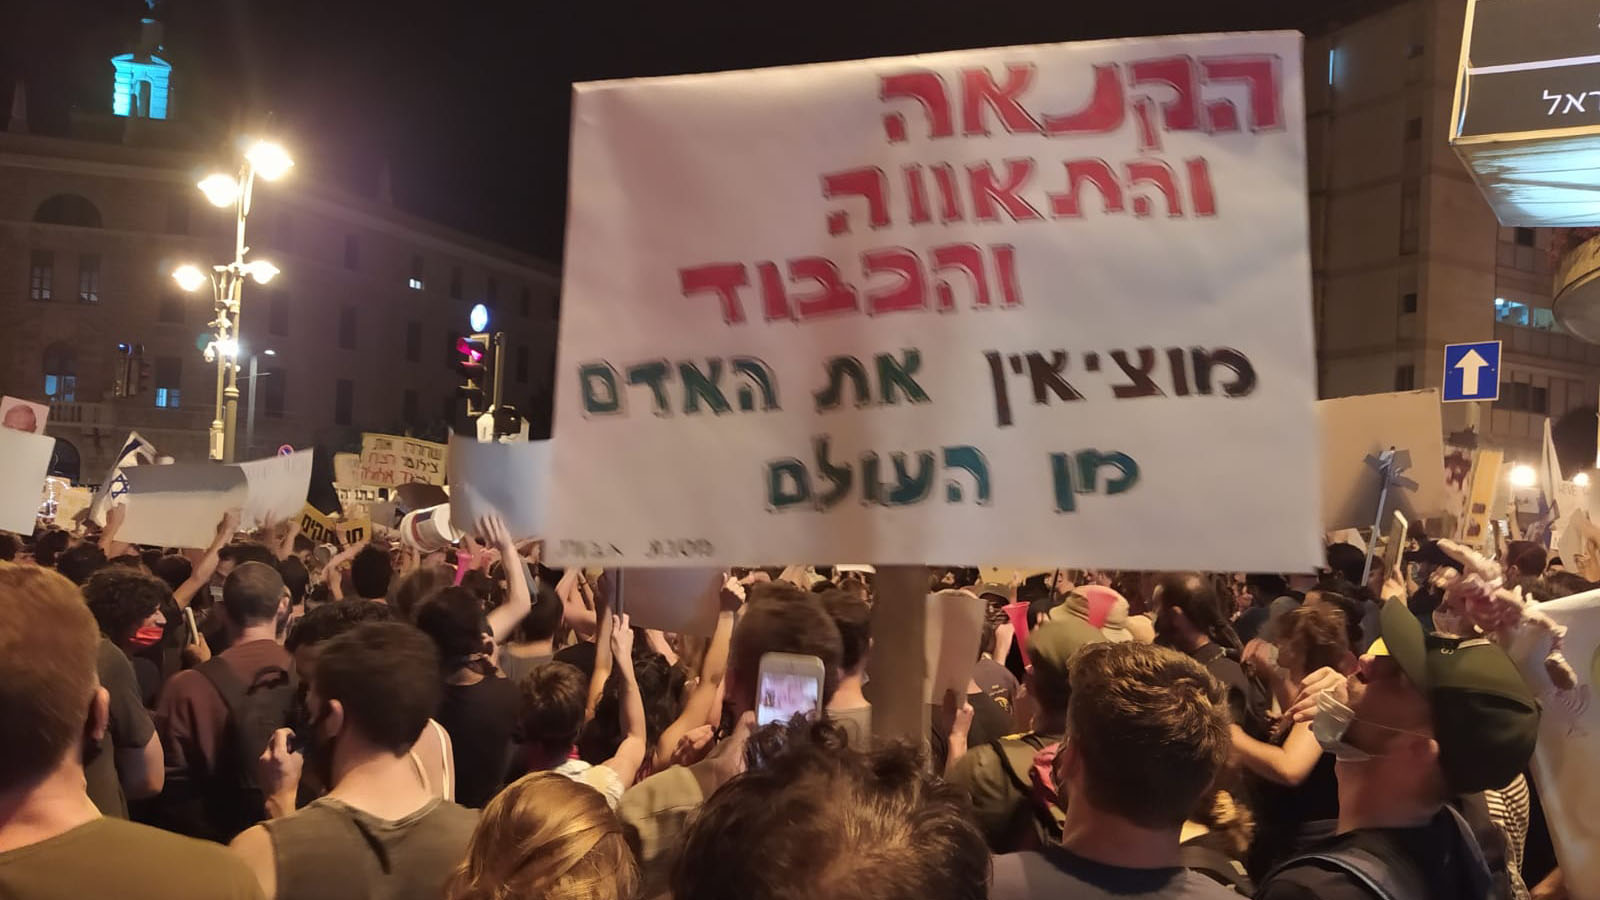 A sign at a demonstration in front of the Prime Minister's residence. Quote from Mishnaic Sources (Photo: Yahel Faraj)